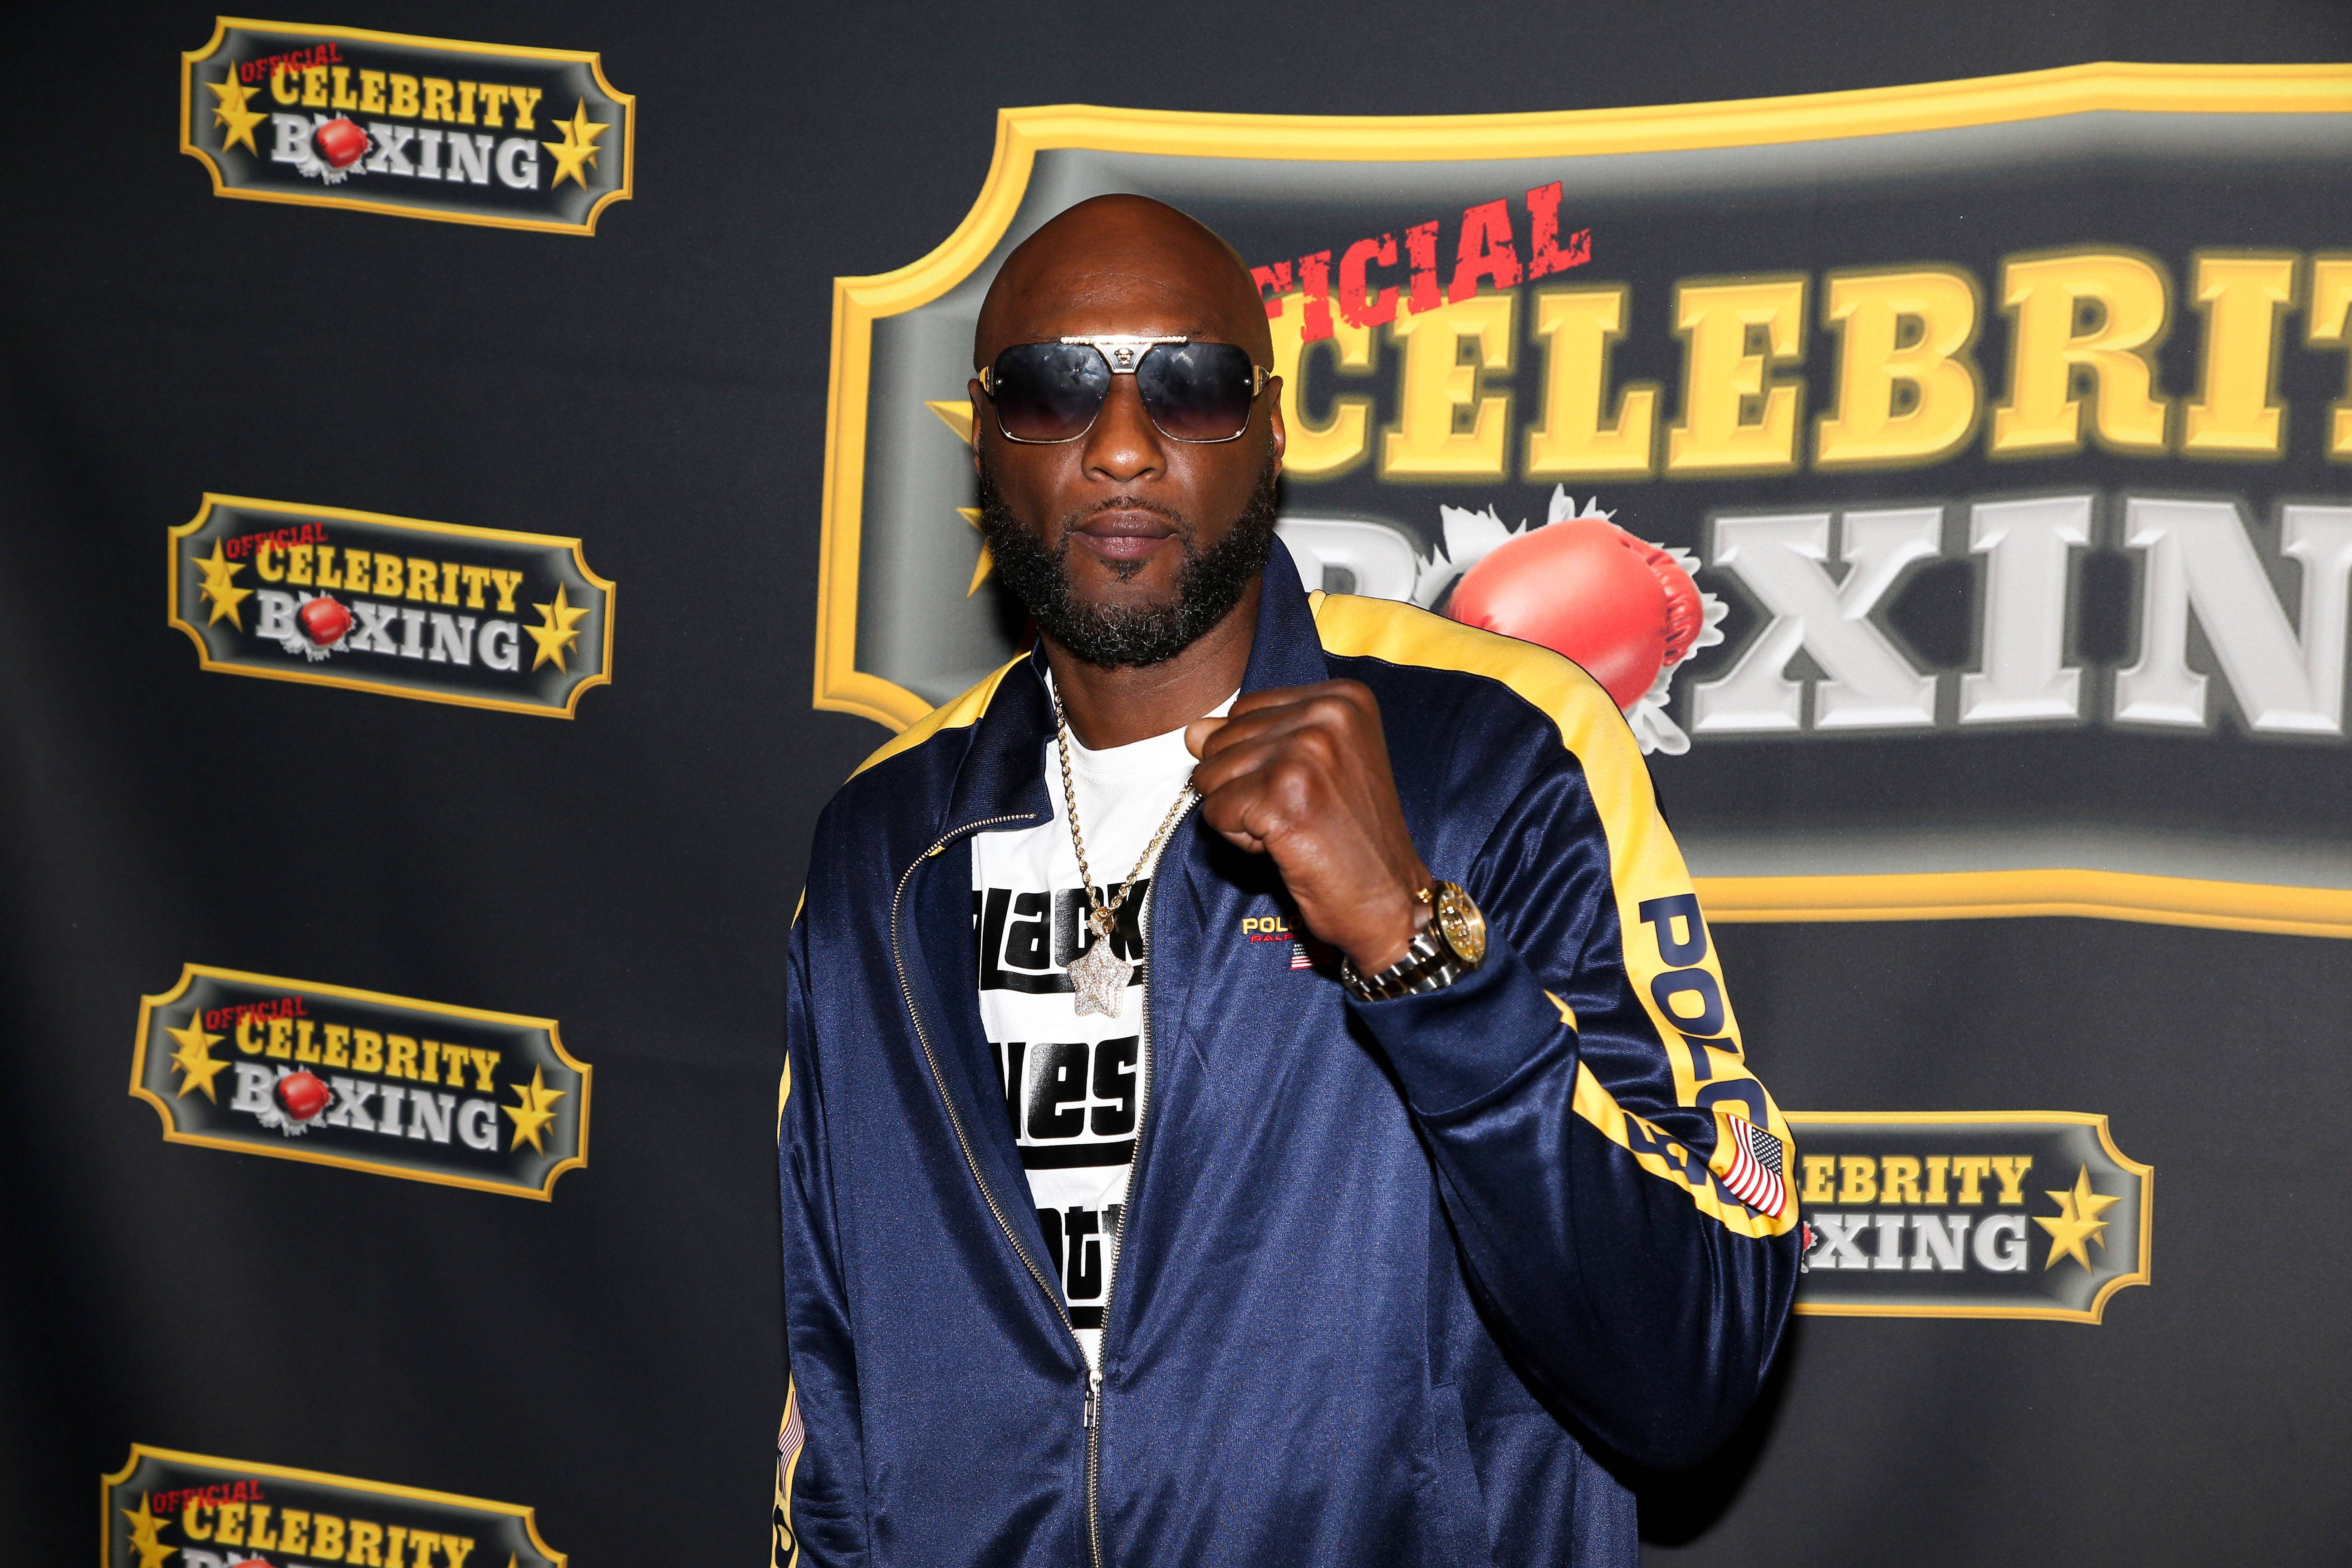 ATLANTIC CITY, NEW JERSEY - JUNE 11: Lamar Odom poses at the Celebrity Boxing match between Lamar Odom and Aaron Carter at Showboat Atlantic City on June 11, 2021 in Atlantic City, New Jersey. (Photo by Bill McCay/Getty Images)